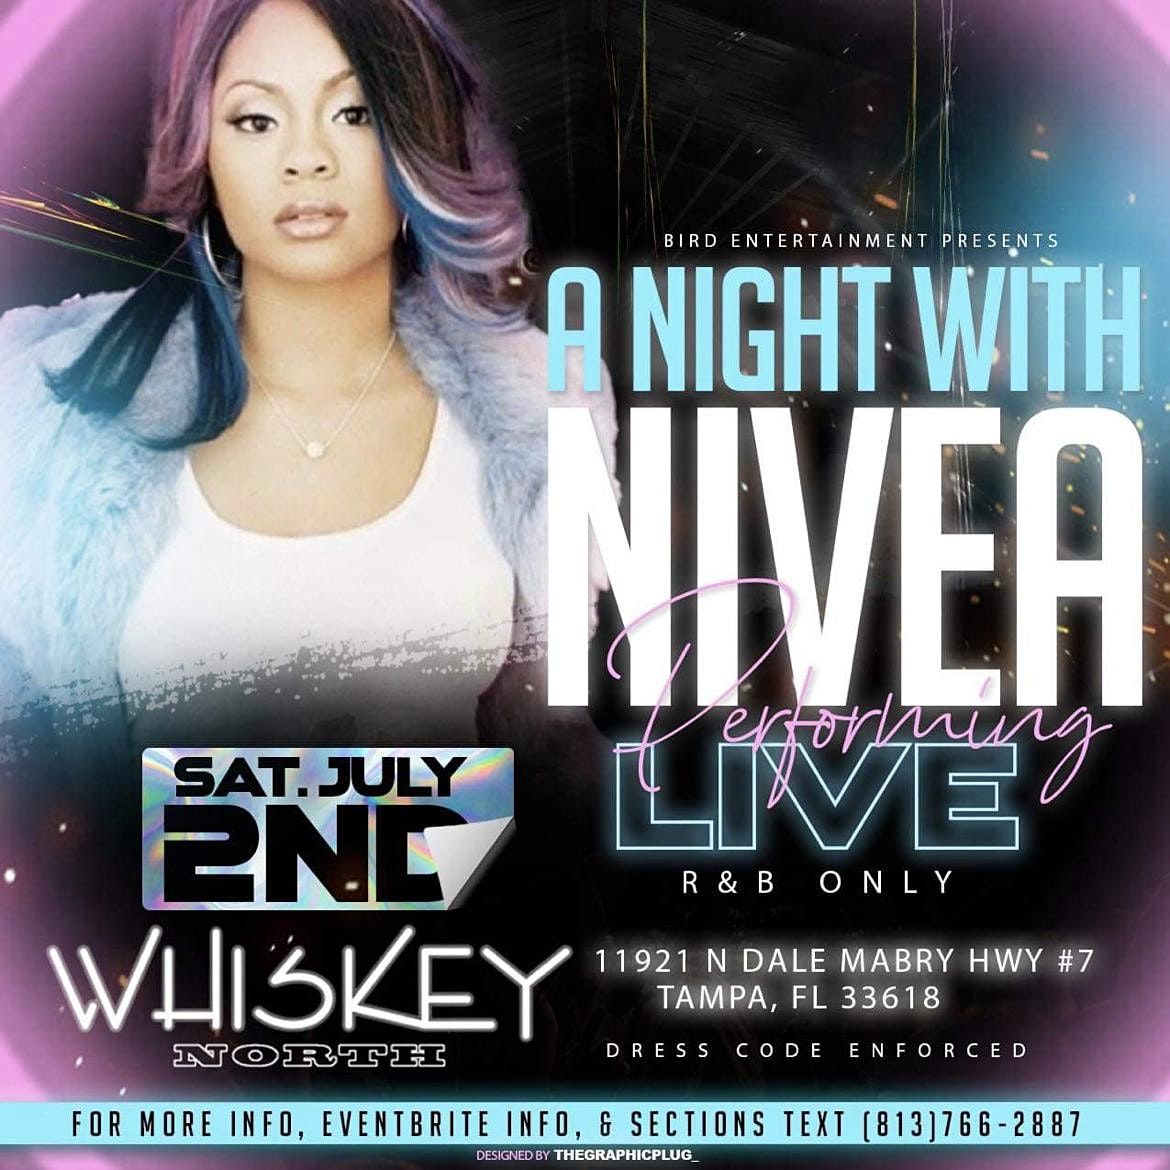 A NIGHT WIT NIVEA (R&B ONLY)